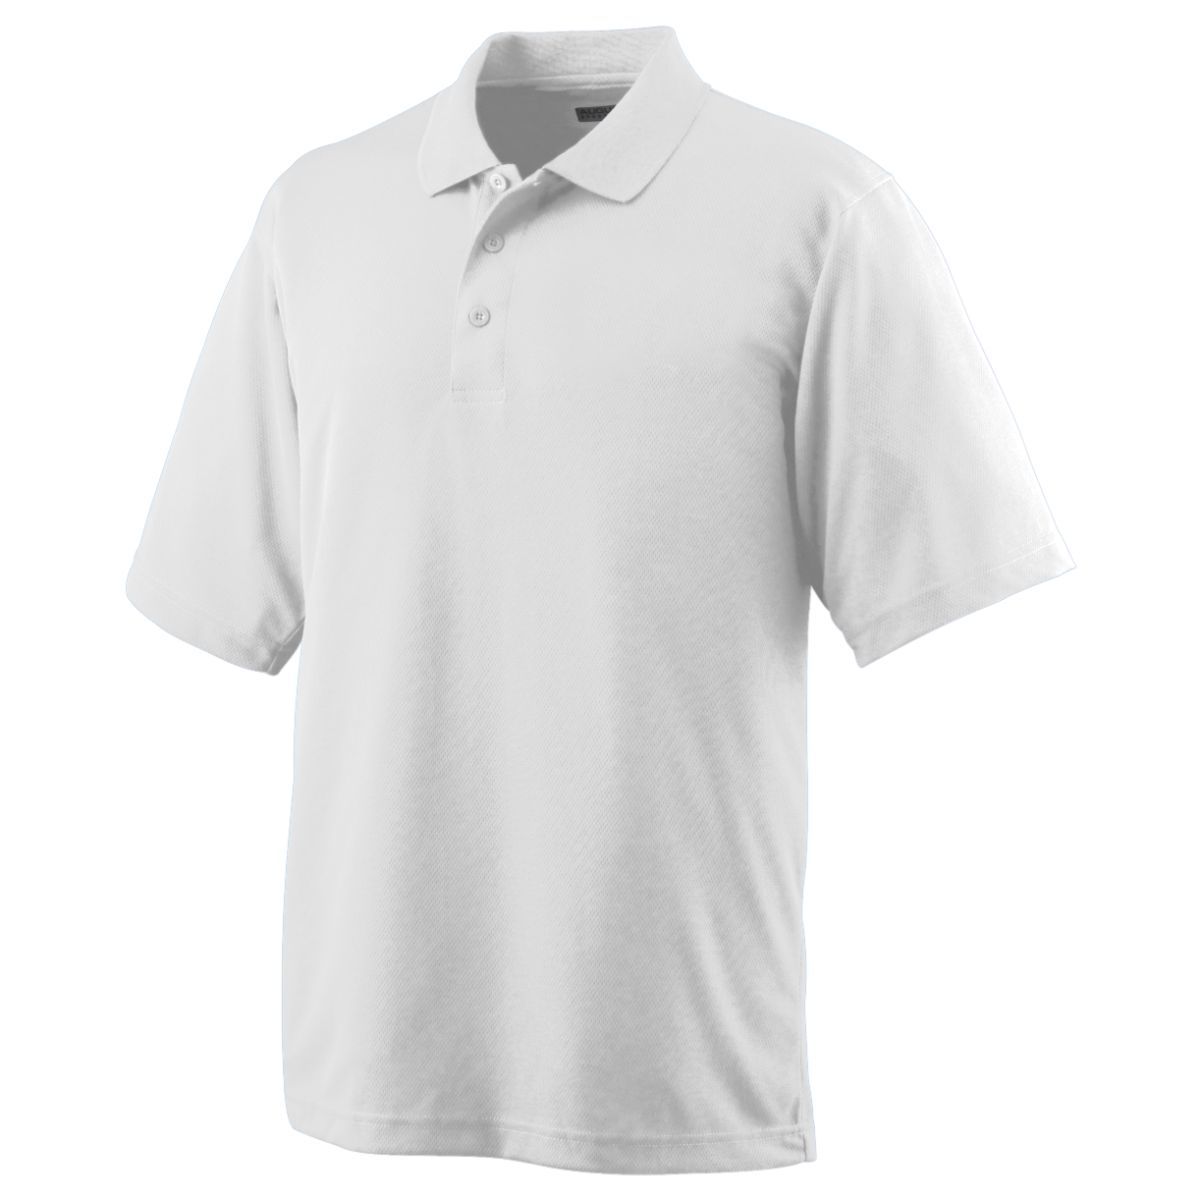 Augusta Sportswear Wicking Mesh Polo in White  -Part of the Adult, Adult-Polos, Polos, Augusta-Products, Tennis, Shirts product lines at KanaleyCreations.com